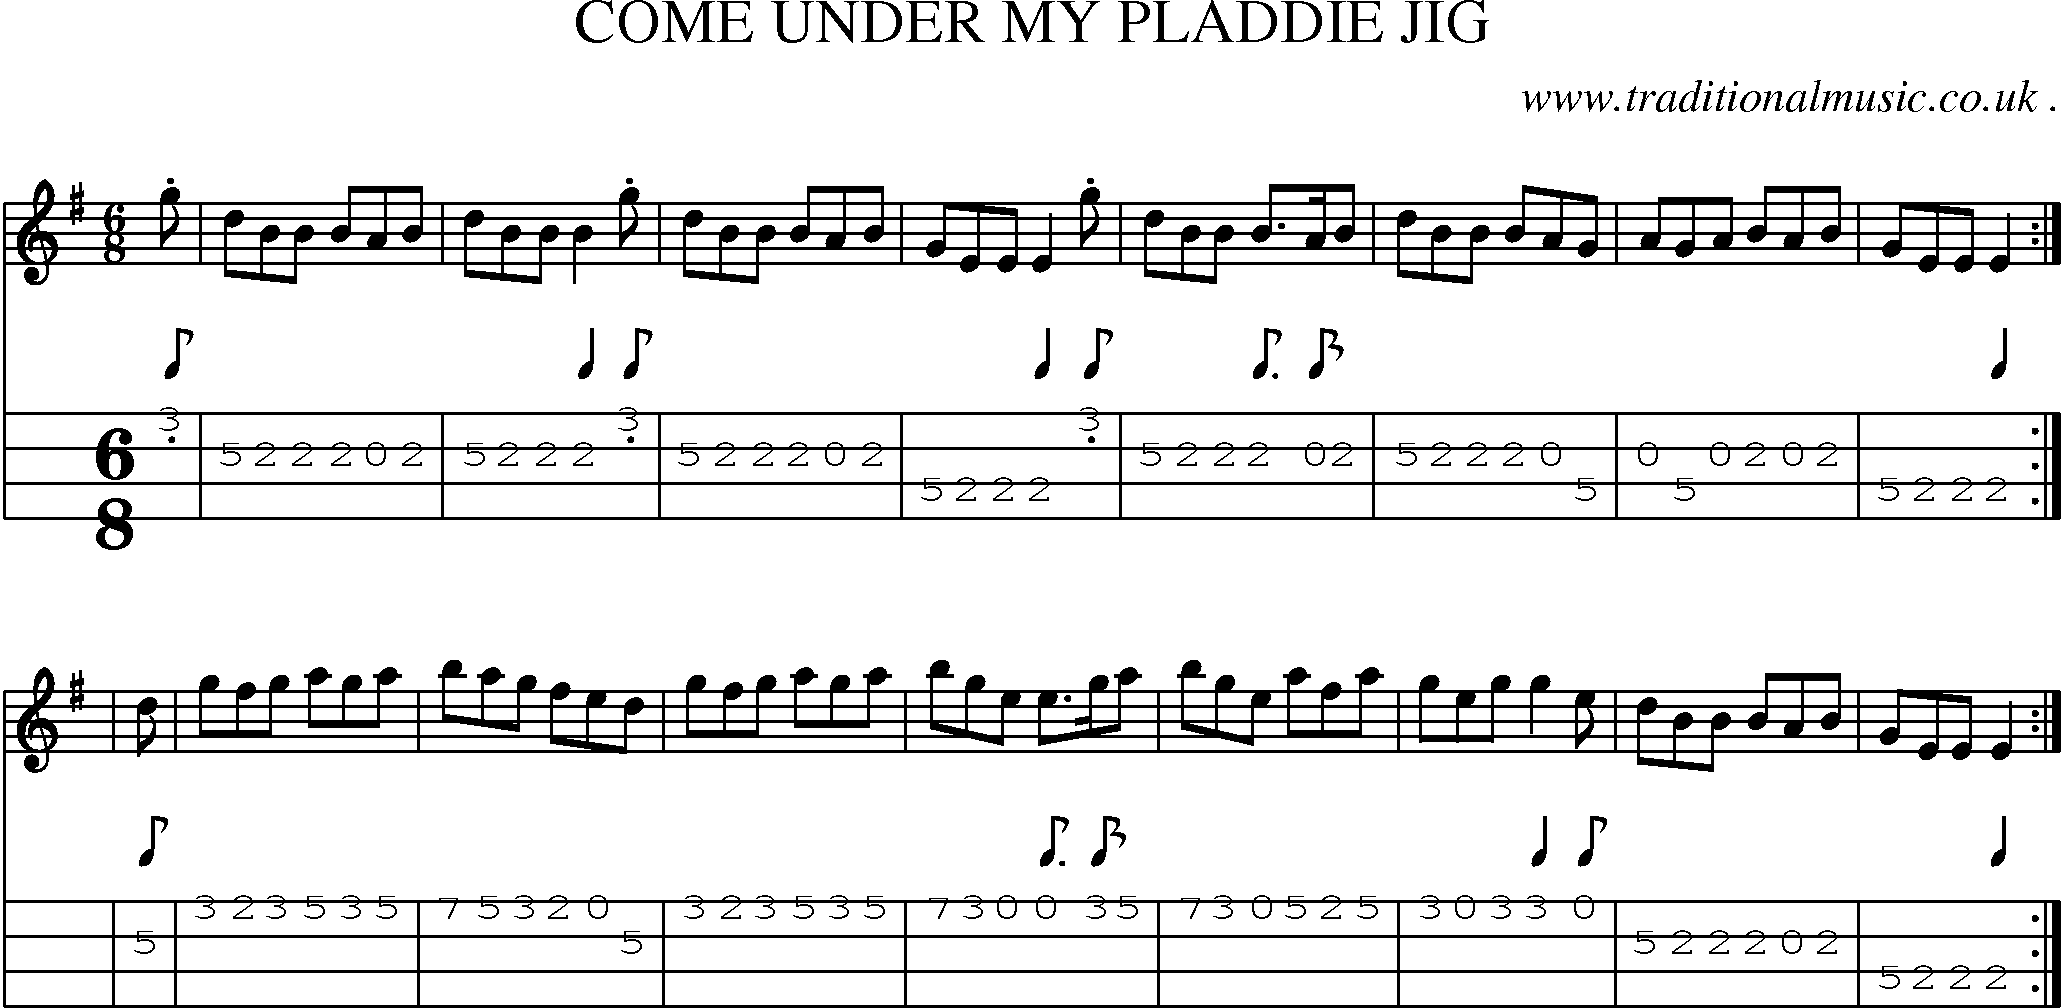 Sheet-Music and Mandolin Tabs for Come Under My Pladdie Jig